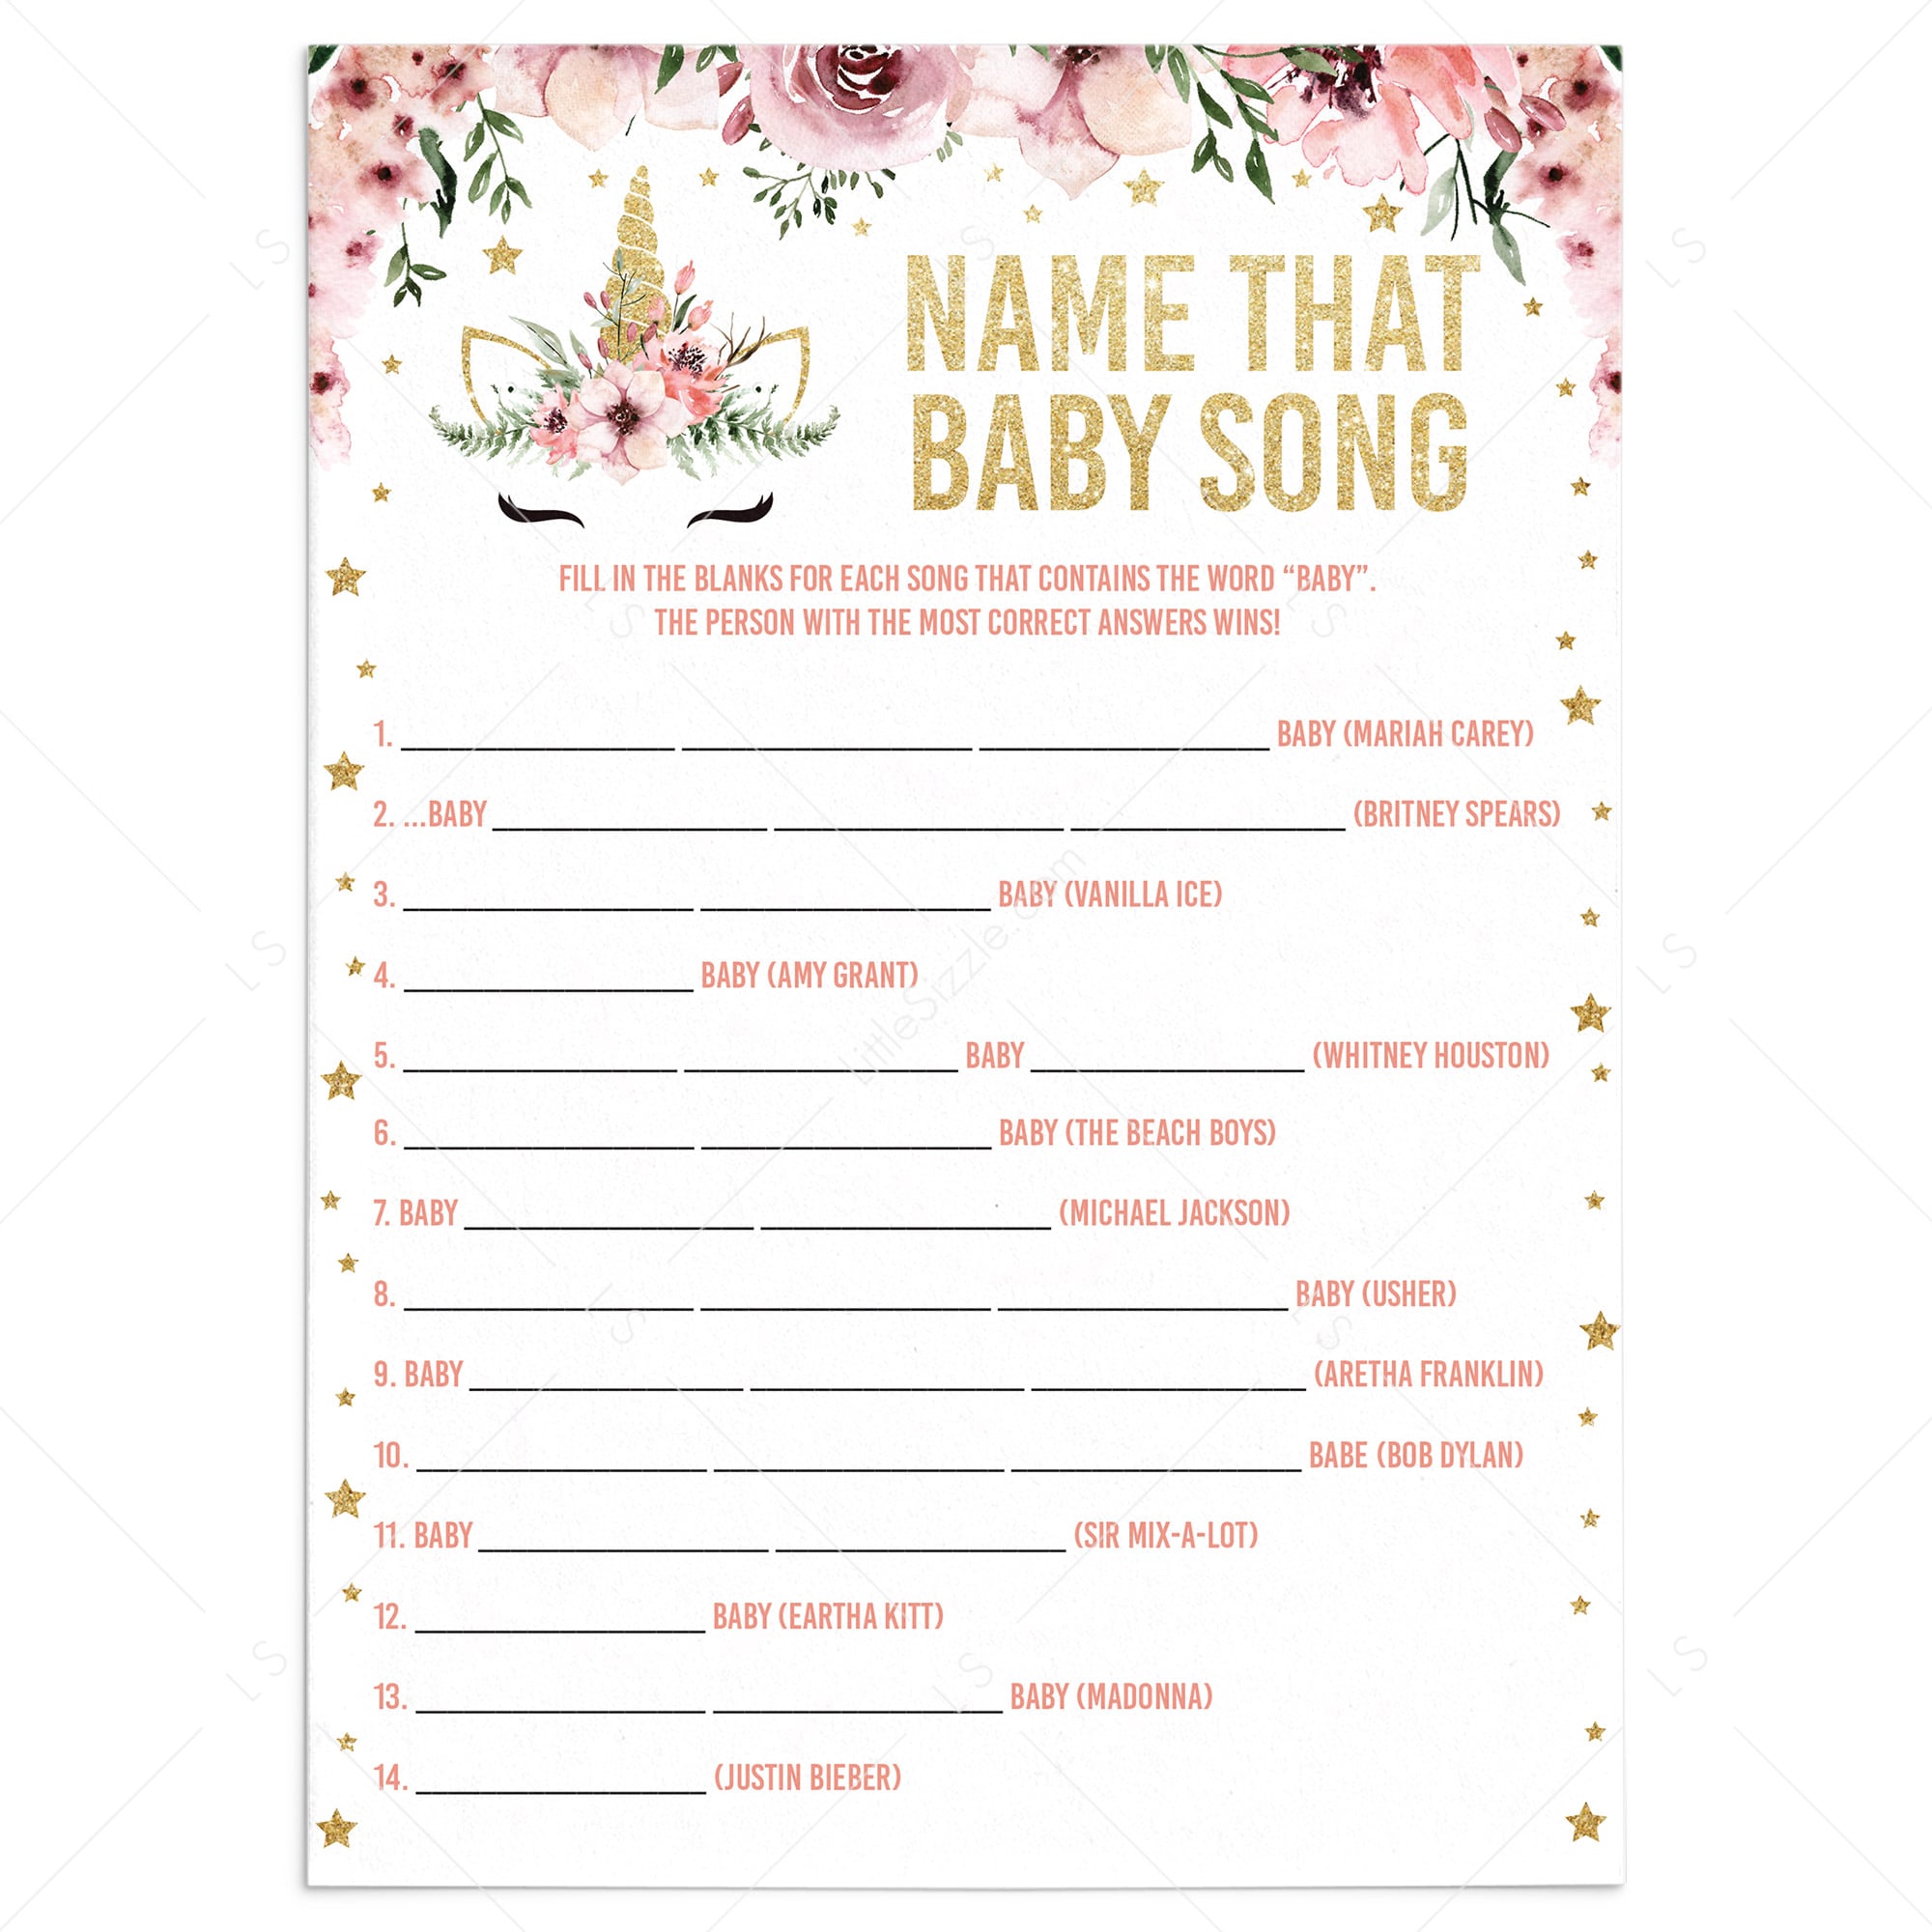 Floral unicorn baby shower games name that baby song by LittleSizzle